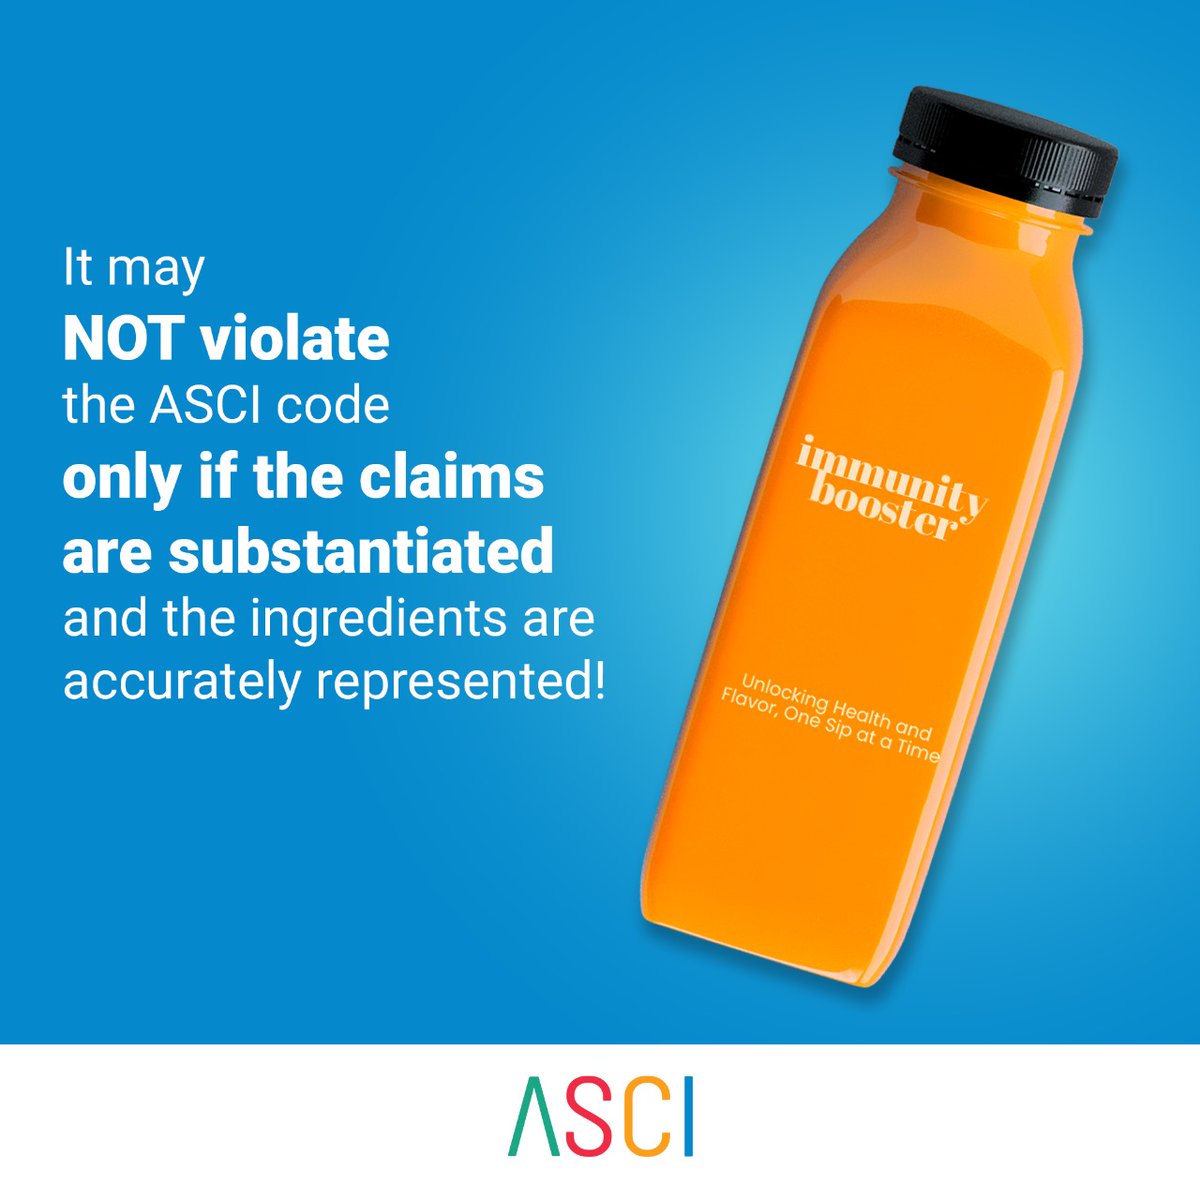 #AdsKaFunda

Brands need to be cautious when making claims in their ads. Slight miscommunication can cause damage to the brand’s reputation.

Remember, an authentic brand image is invaluable.

#ASCI #ResponsibleAdvertising #Brands #TheASCICode #ASCIAcademy #GoodAds